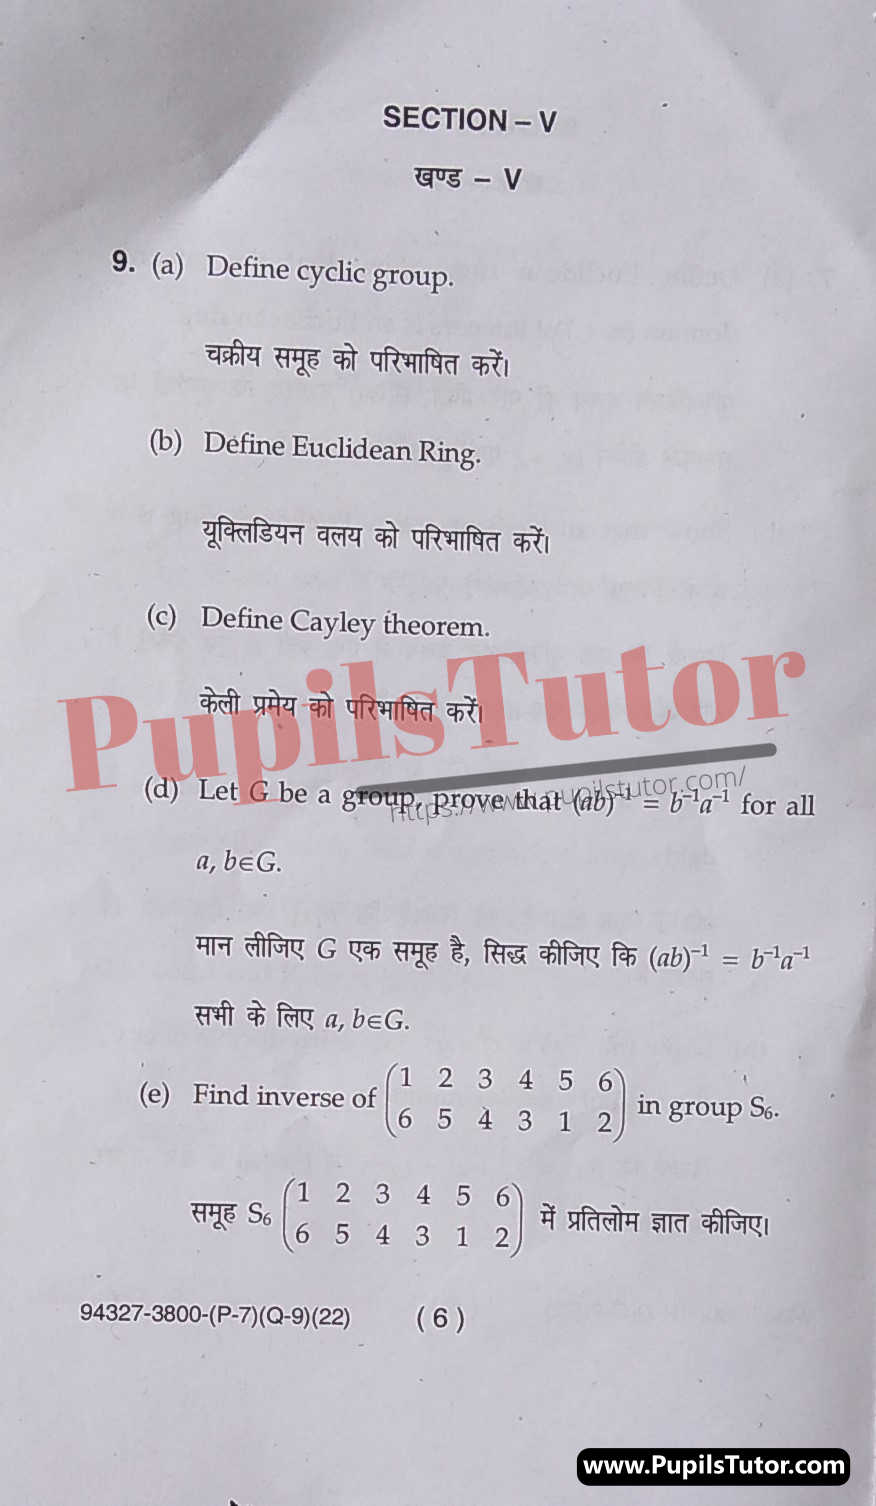 MDU (Maharshi Dayanand University, Rohtak Haryana) Pass Course (B.A. 5th Sem) Groups And Rings Math - II Question Paper Of February, 2022 Exam PDF Download Free (Page 6)